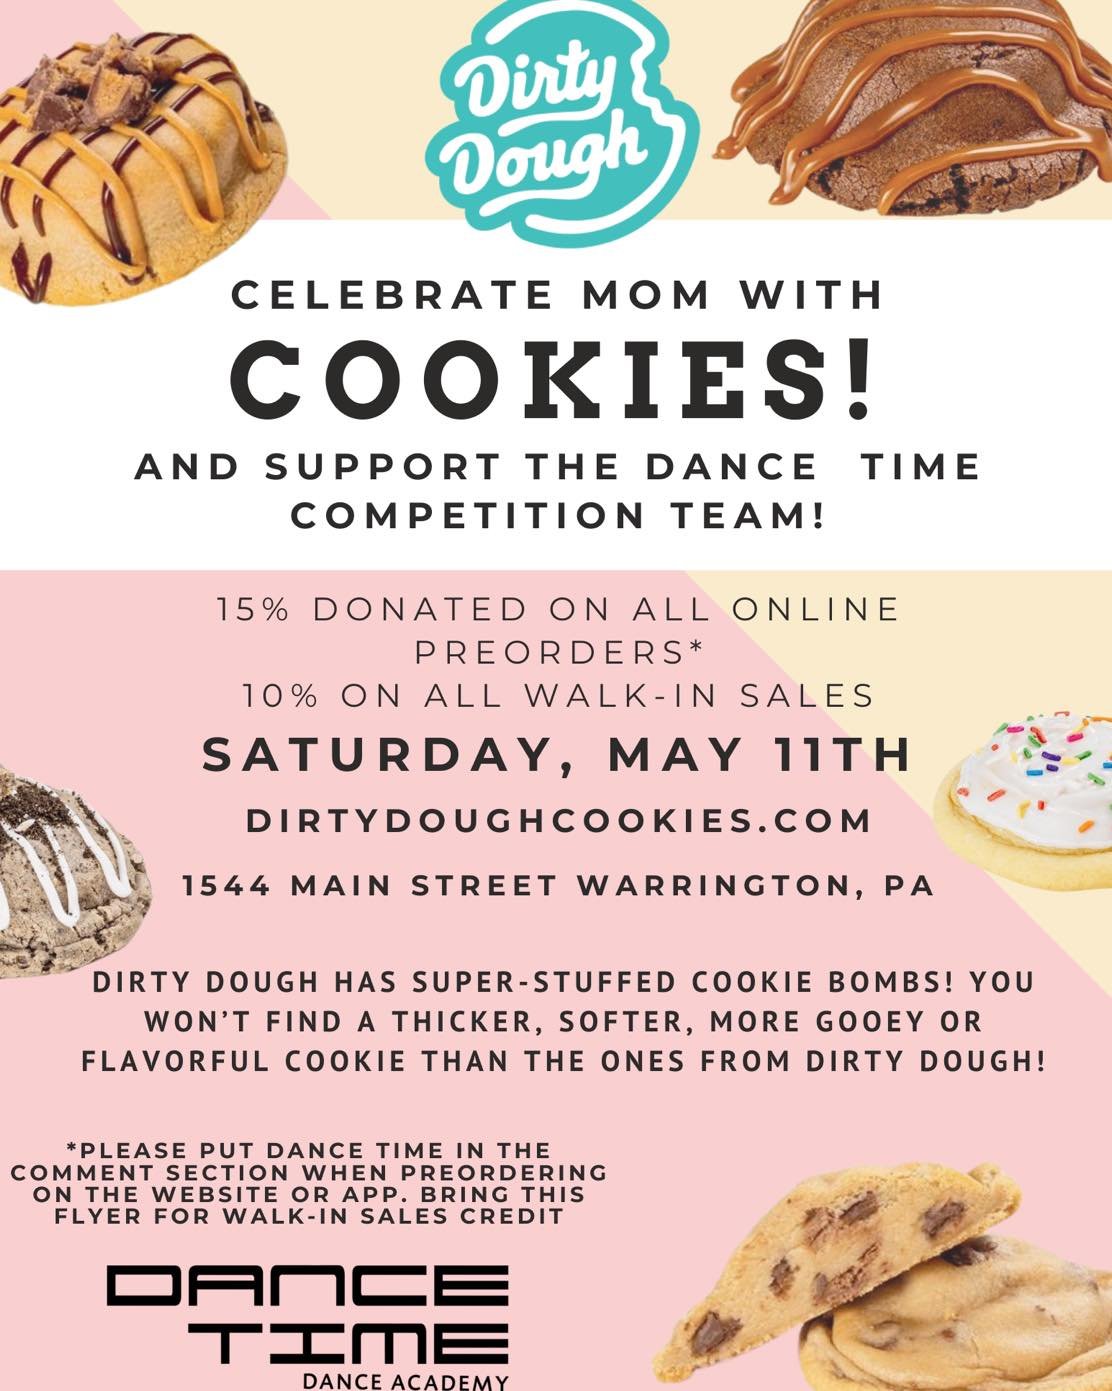 THIS SATURDAY! Support our team with your purchase at Dirty Dough in store or online&hellip; just in time for Mother&rsquo;s Day 🍪💗 

If ordering online, please put Dance Time Dance Academy in the comment section. For all in store purchases, show t